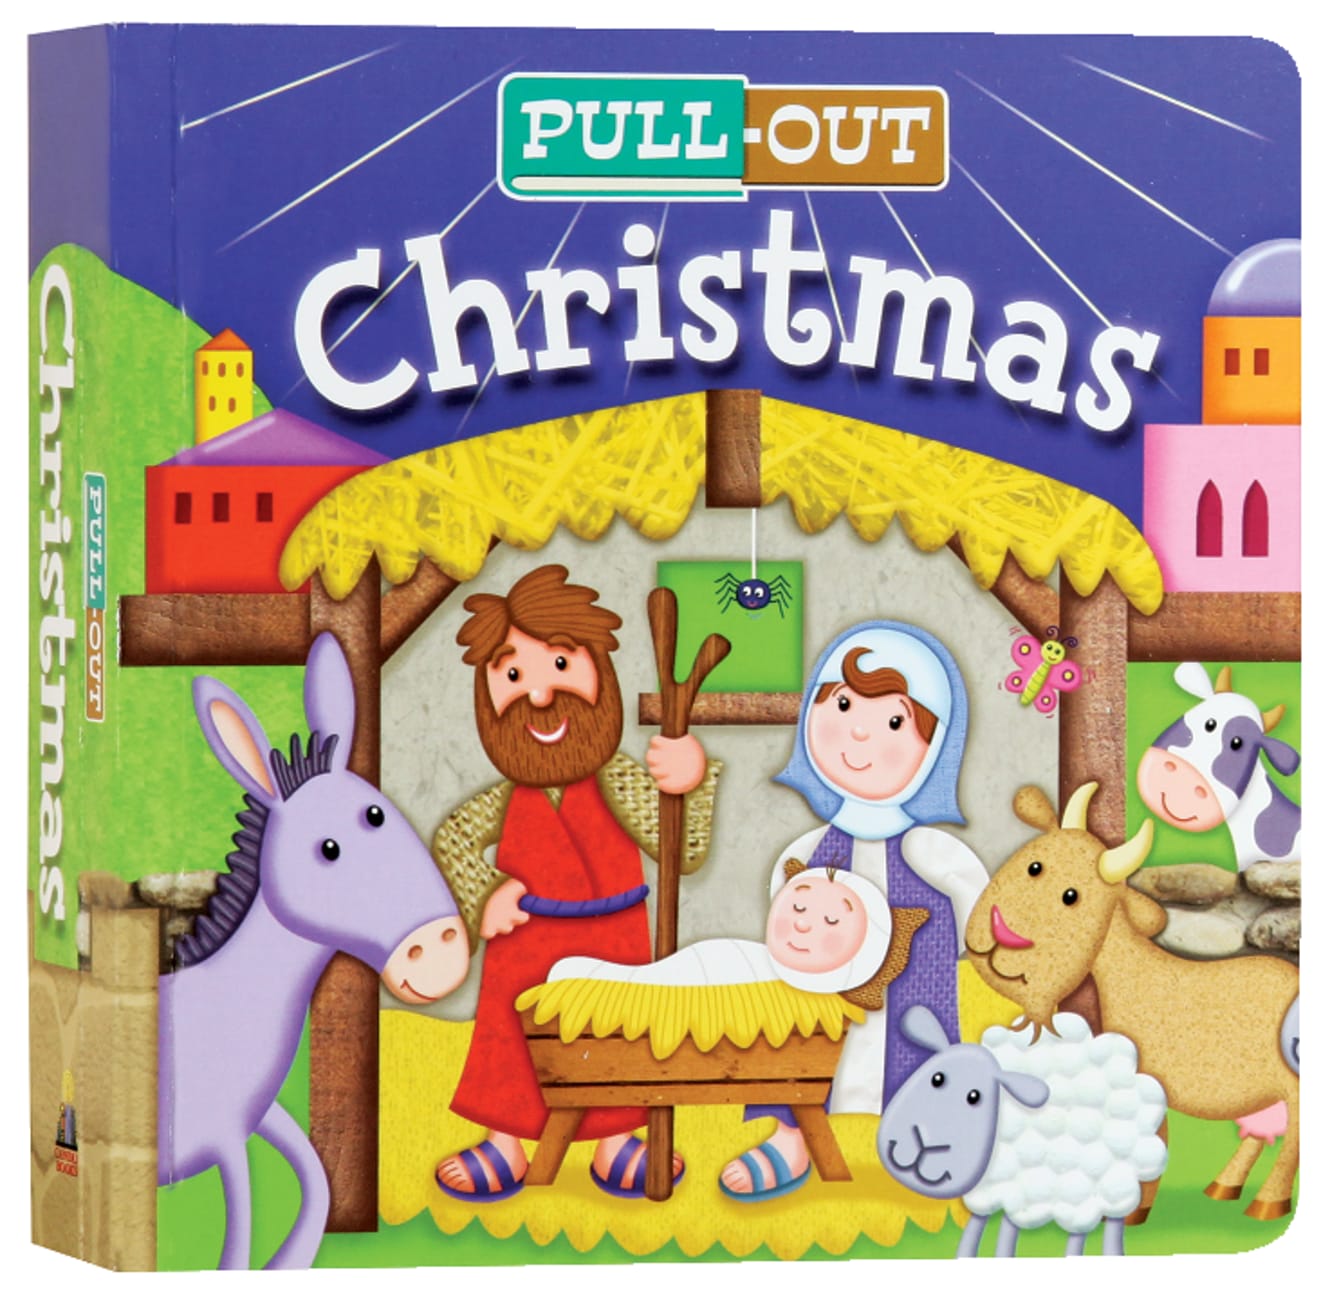 PULL-OUT CHRISTMAS